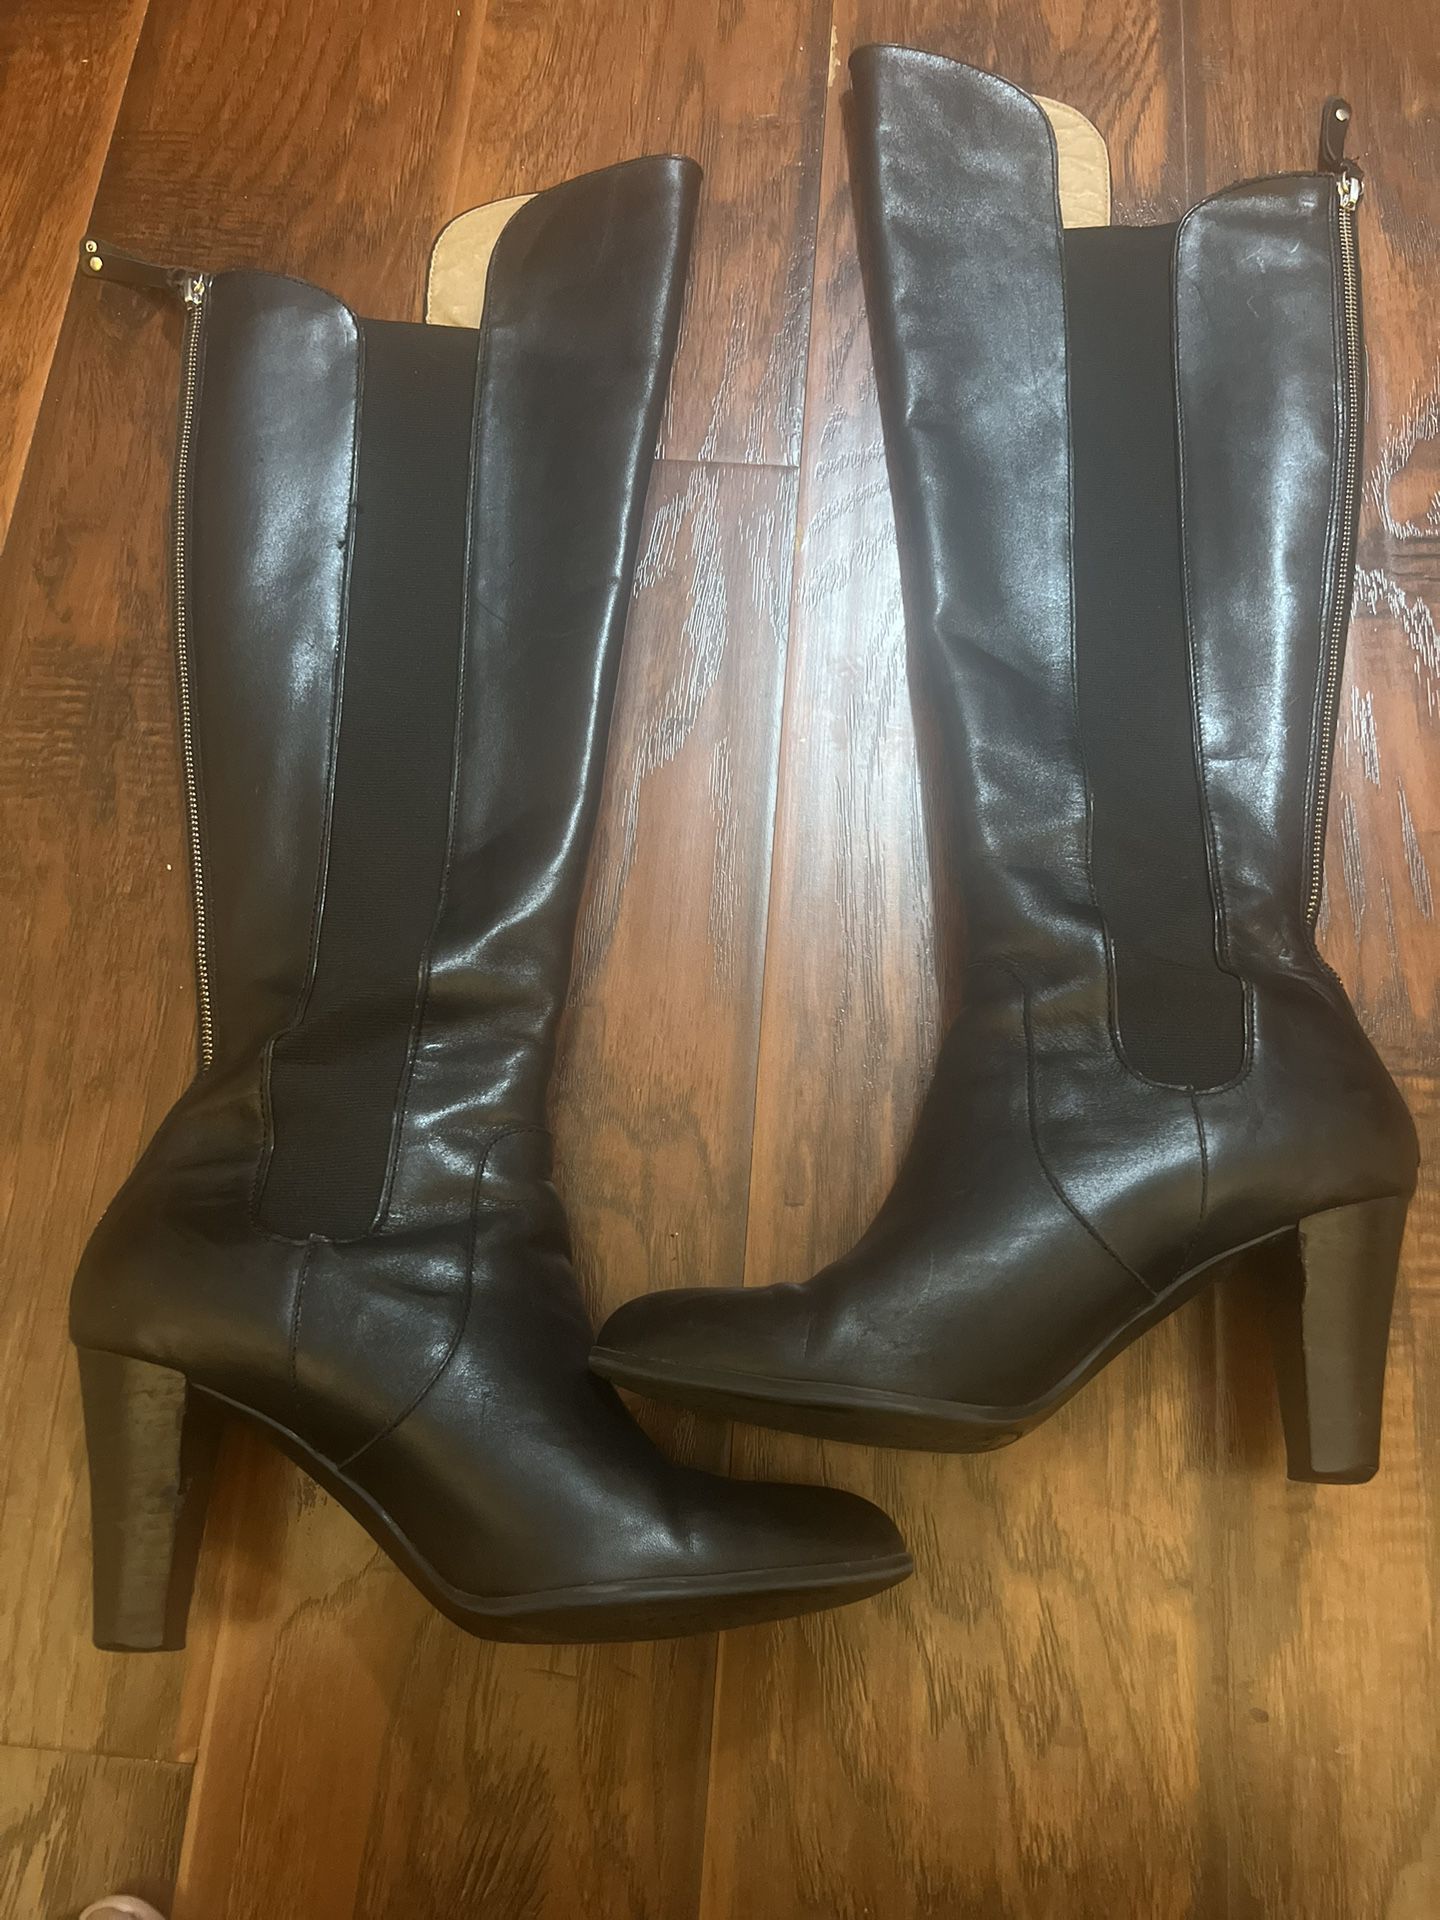 Knee High Boots size 11